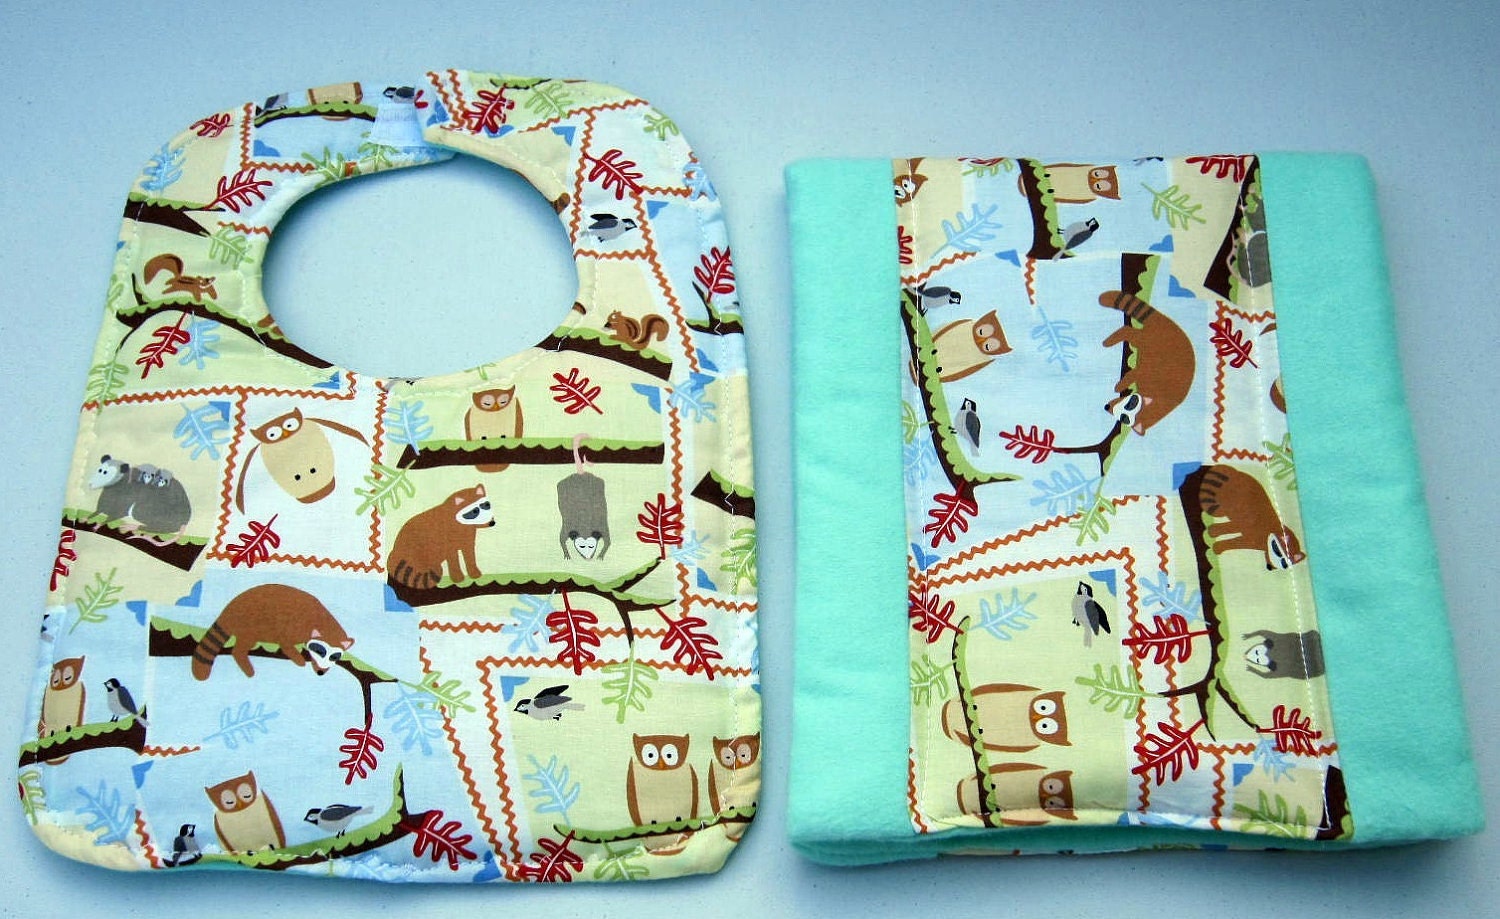 Baby Bib and Burp pad set featuring Owls and Forest Animals handcrafted by Sewinggranny